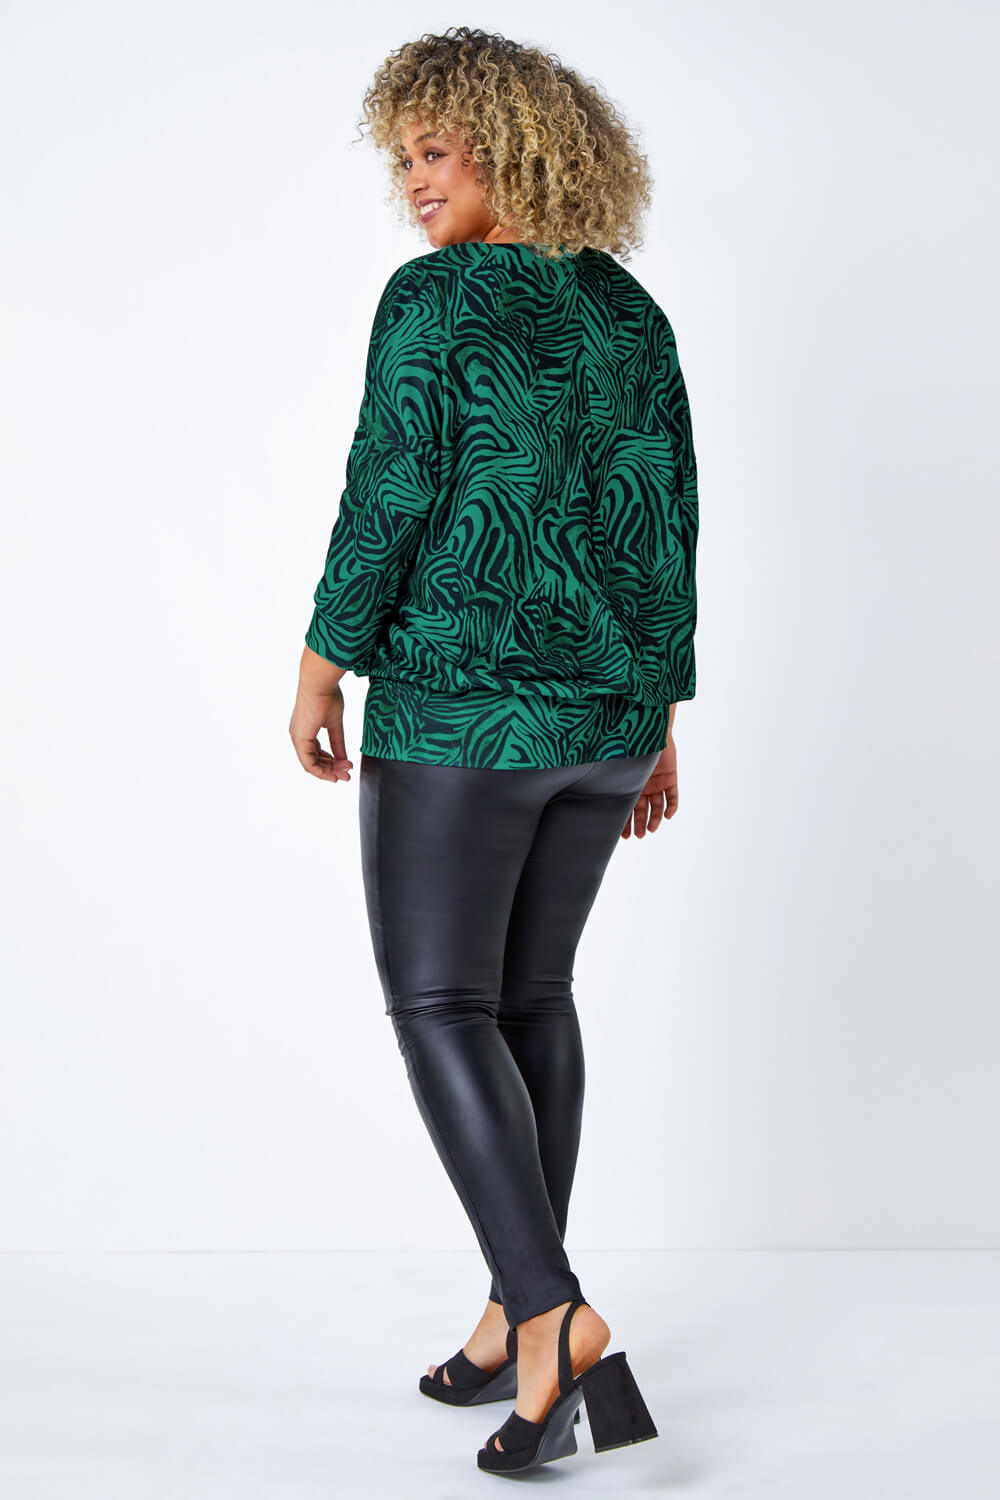 Green Curve Animal Print Blouson Stretch Top, Image 3 of 5